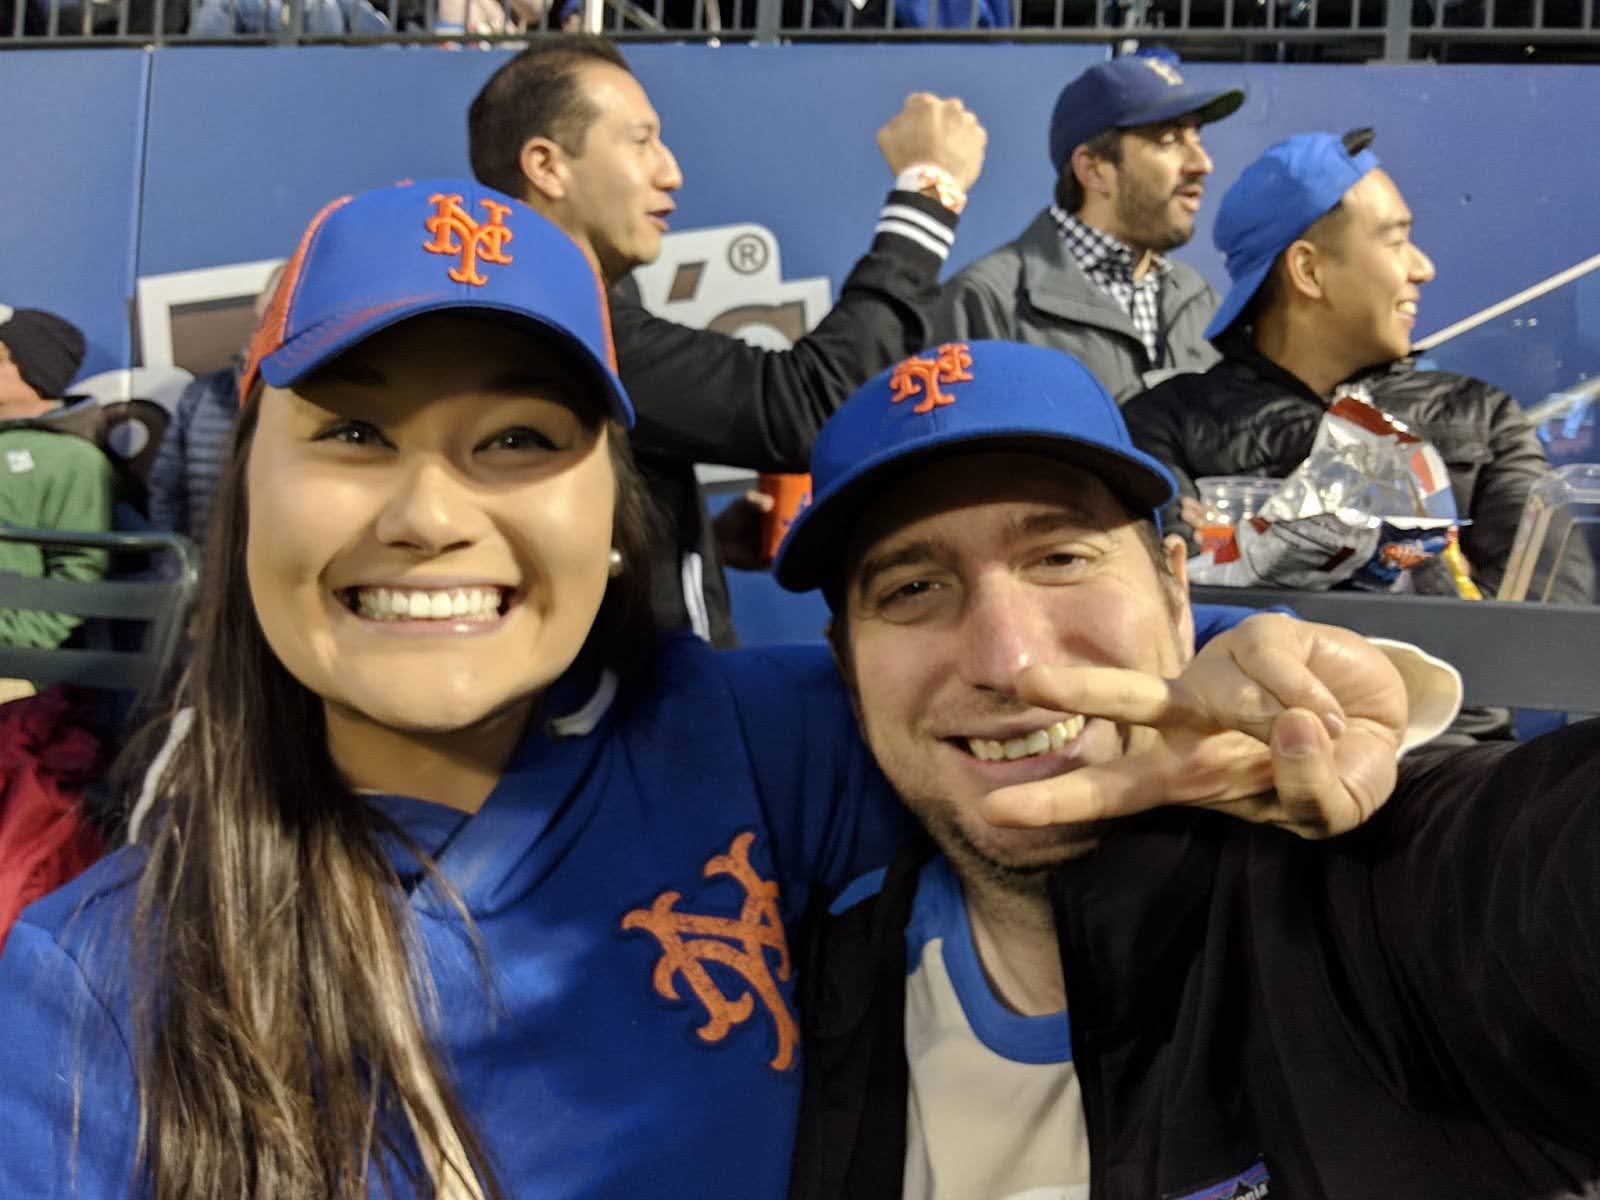 LONDONmiddlebury owners Matt and Ashley at a Mets game